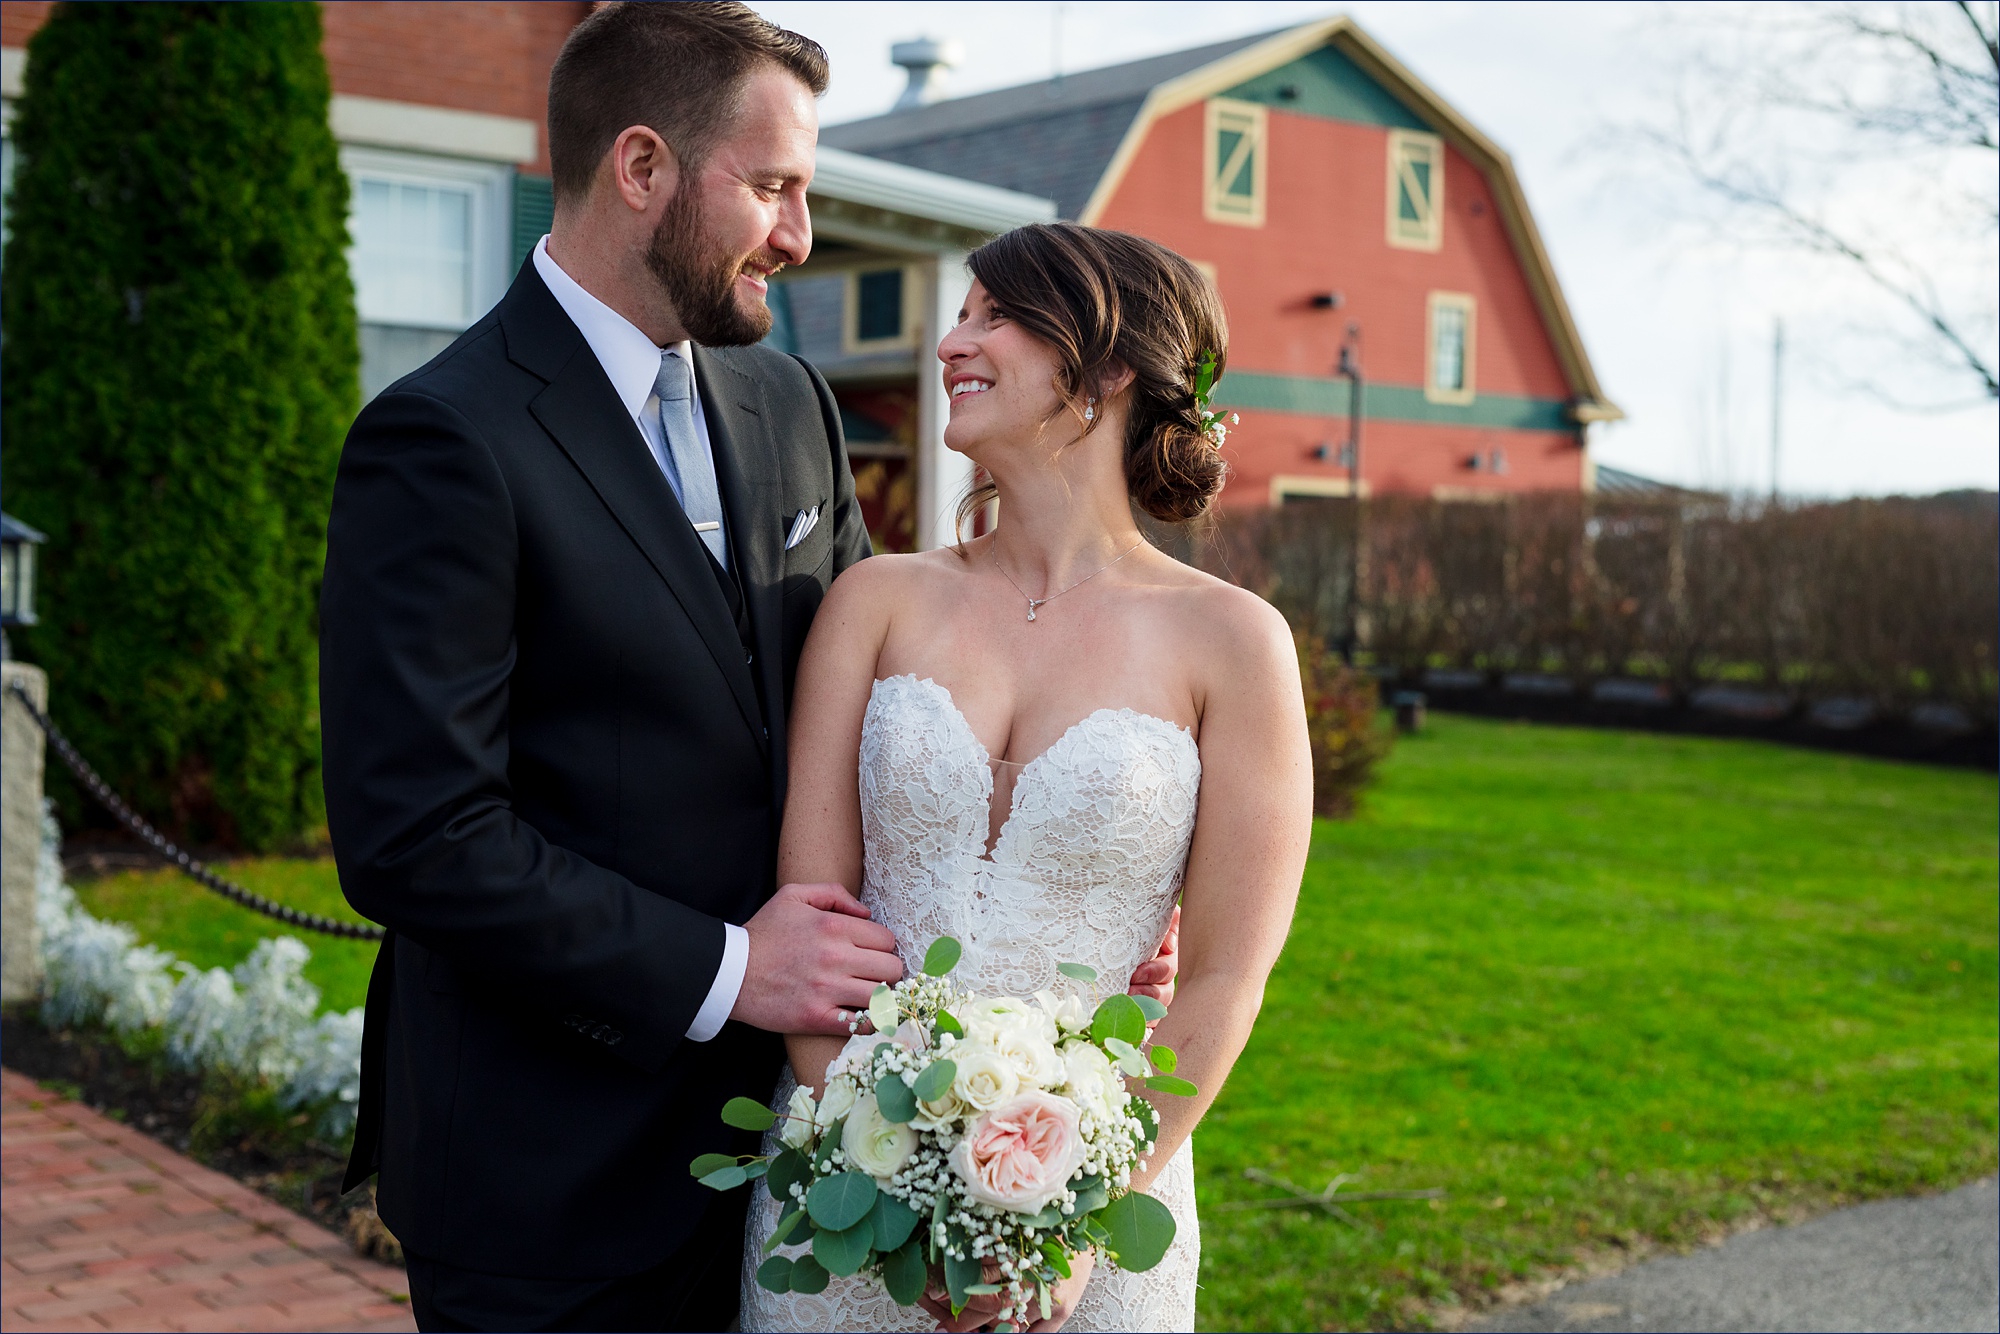 The newlyweds laugh together in front of the Red Barn at Outlook Farm